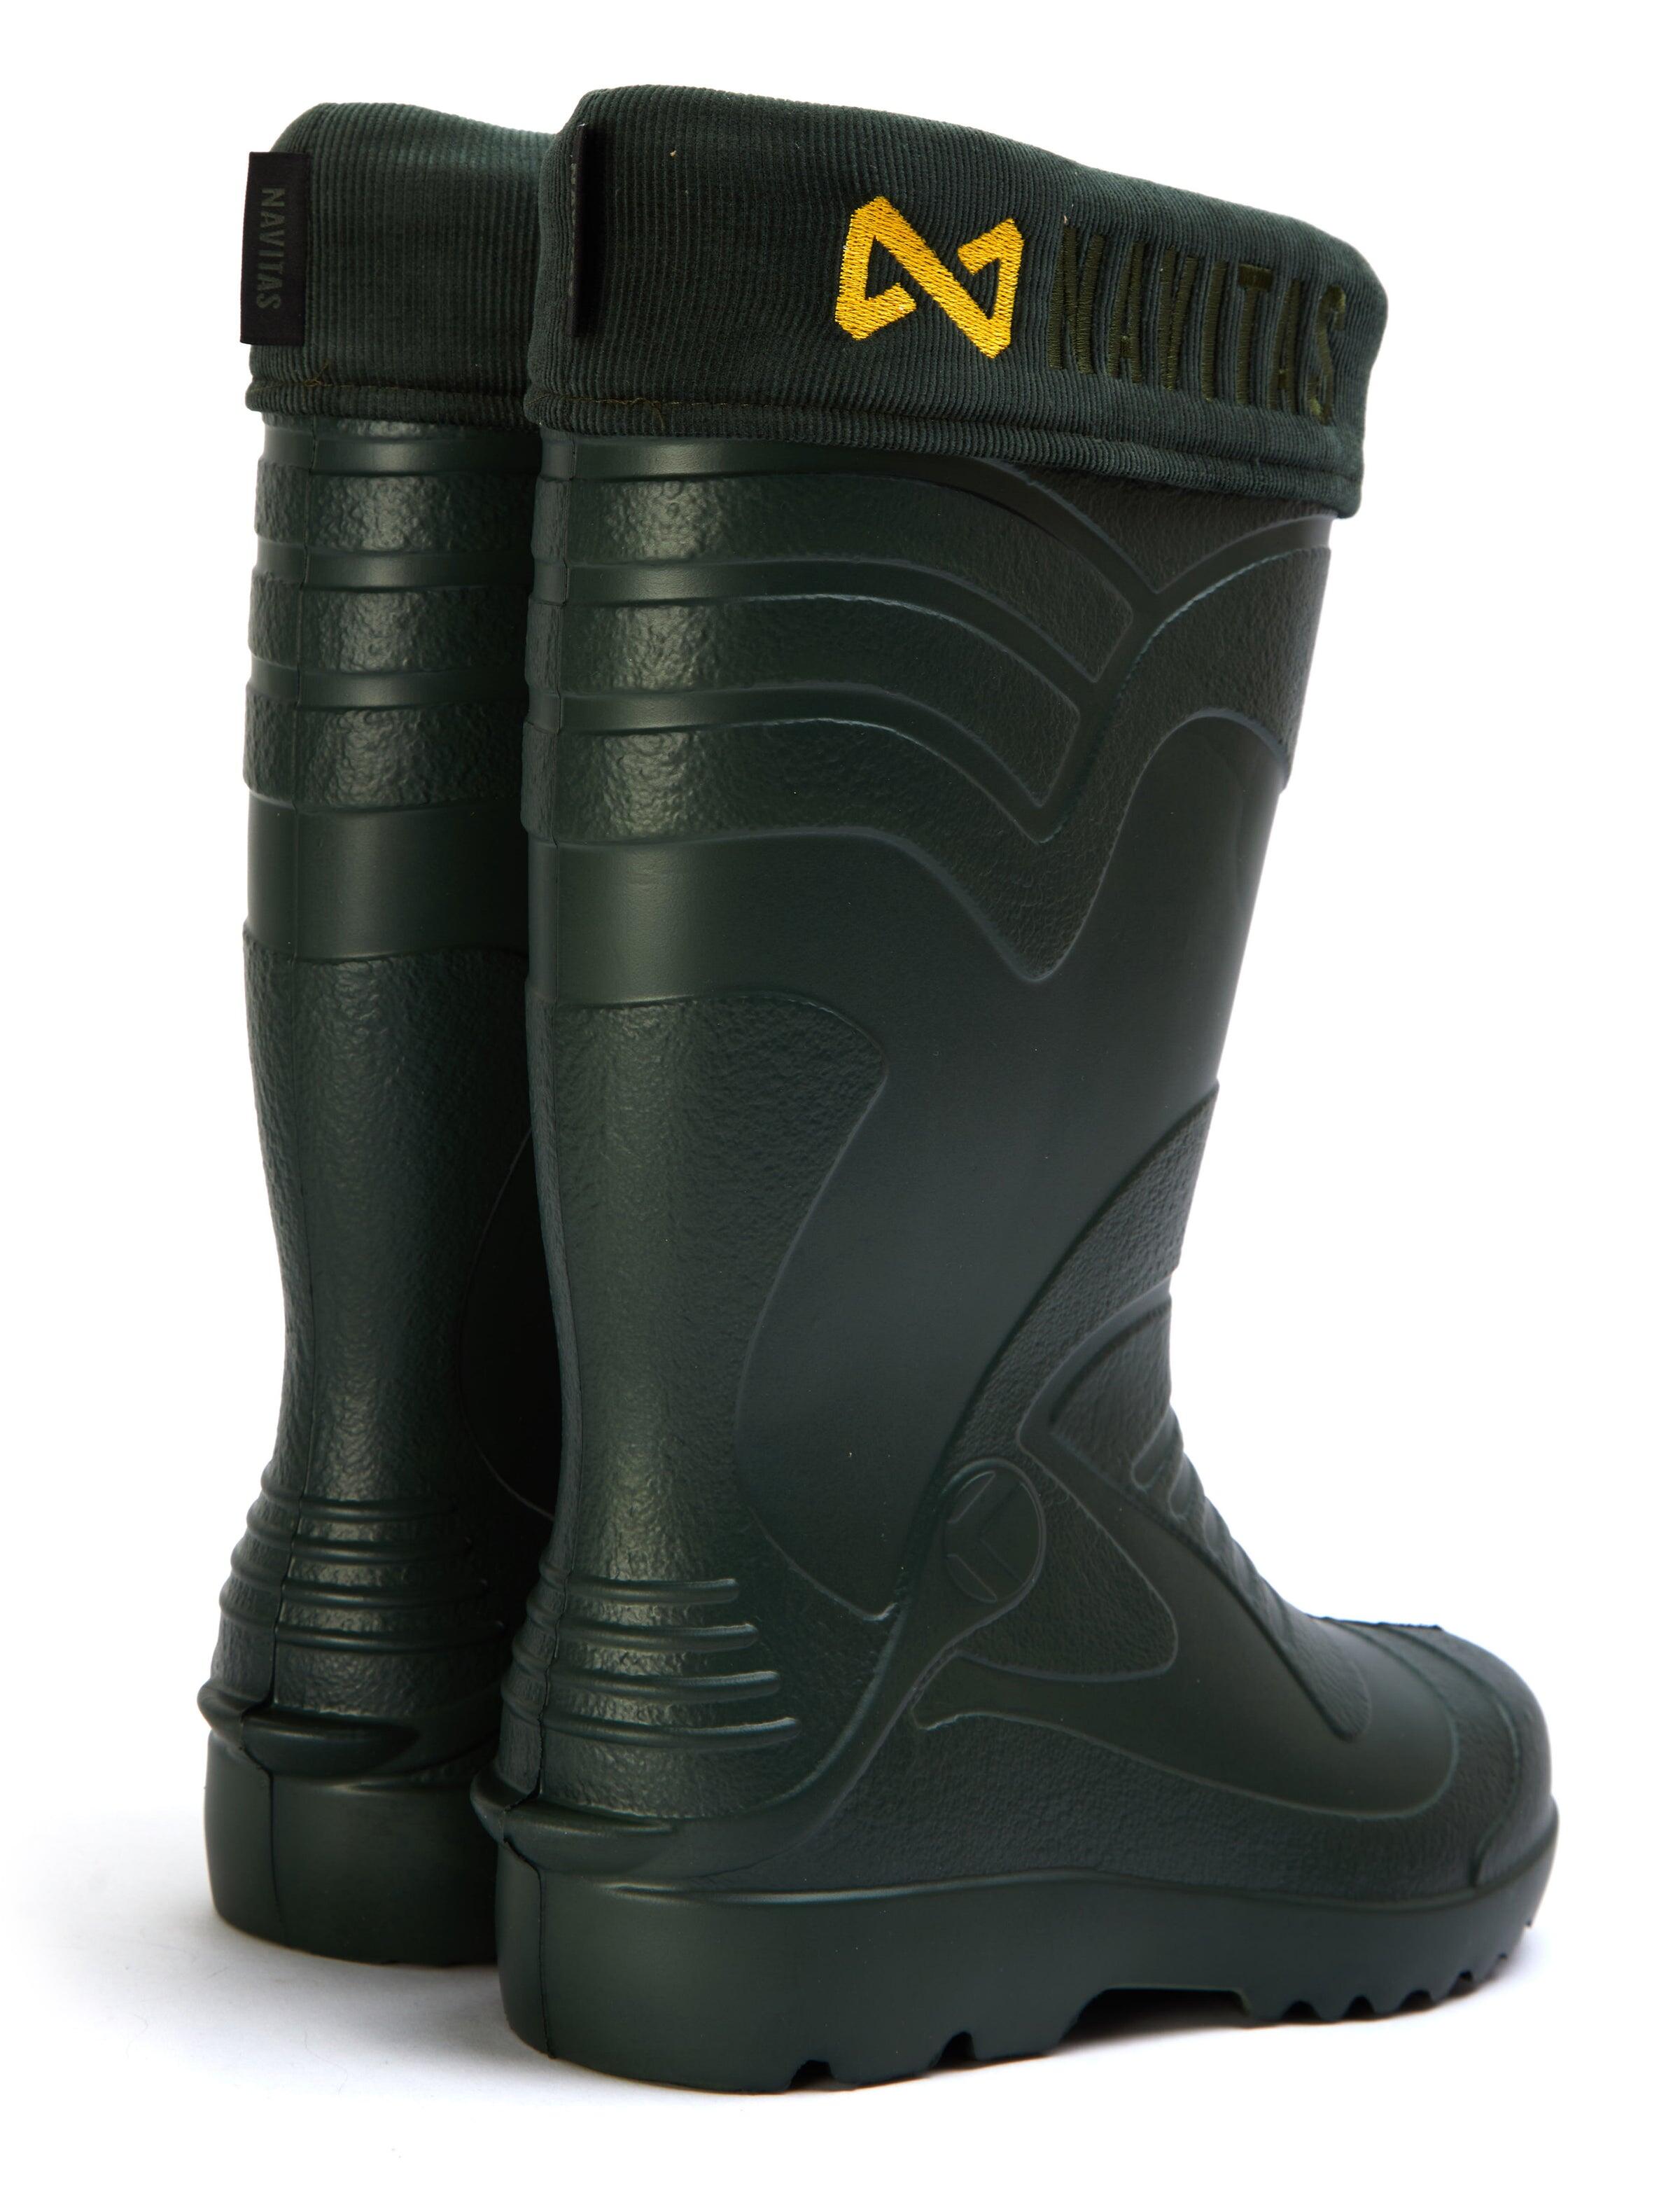 NVTS LITE Insulated Welly Boots 3/4